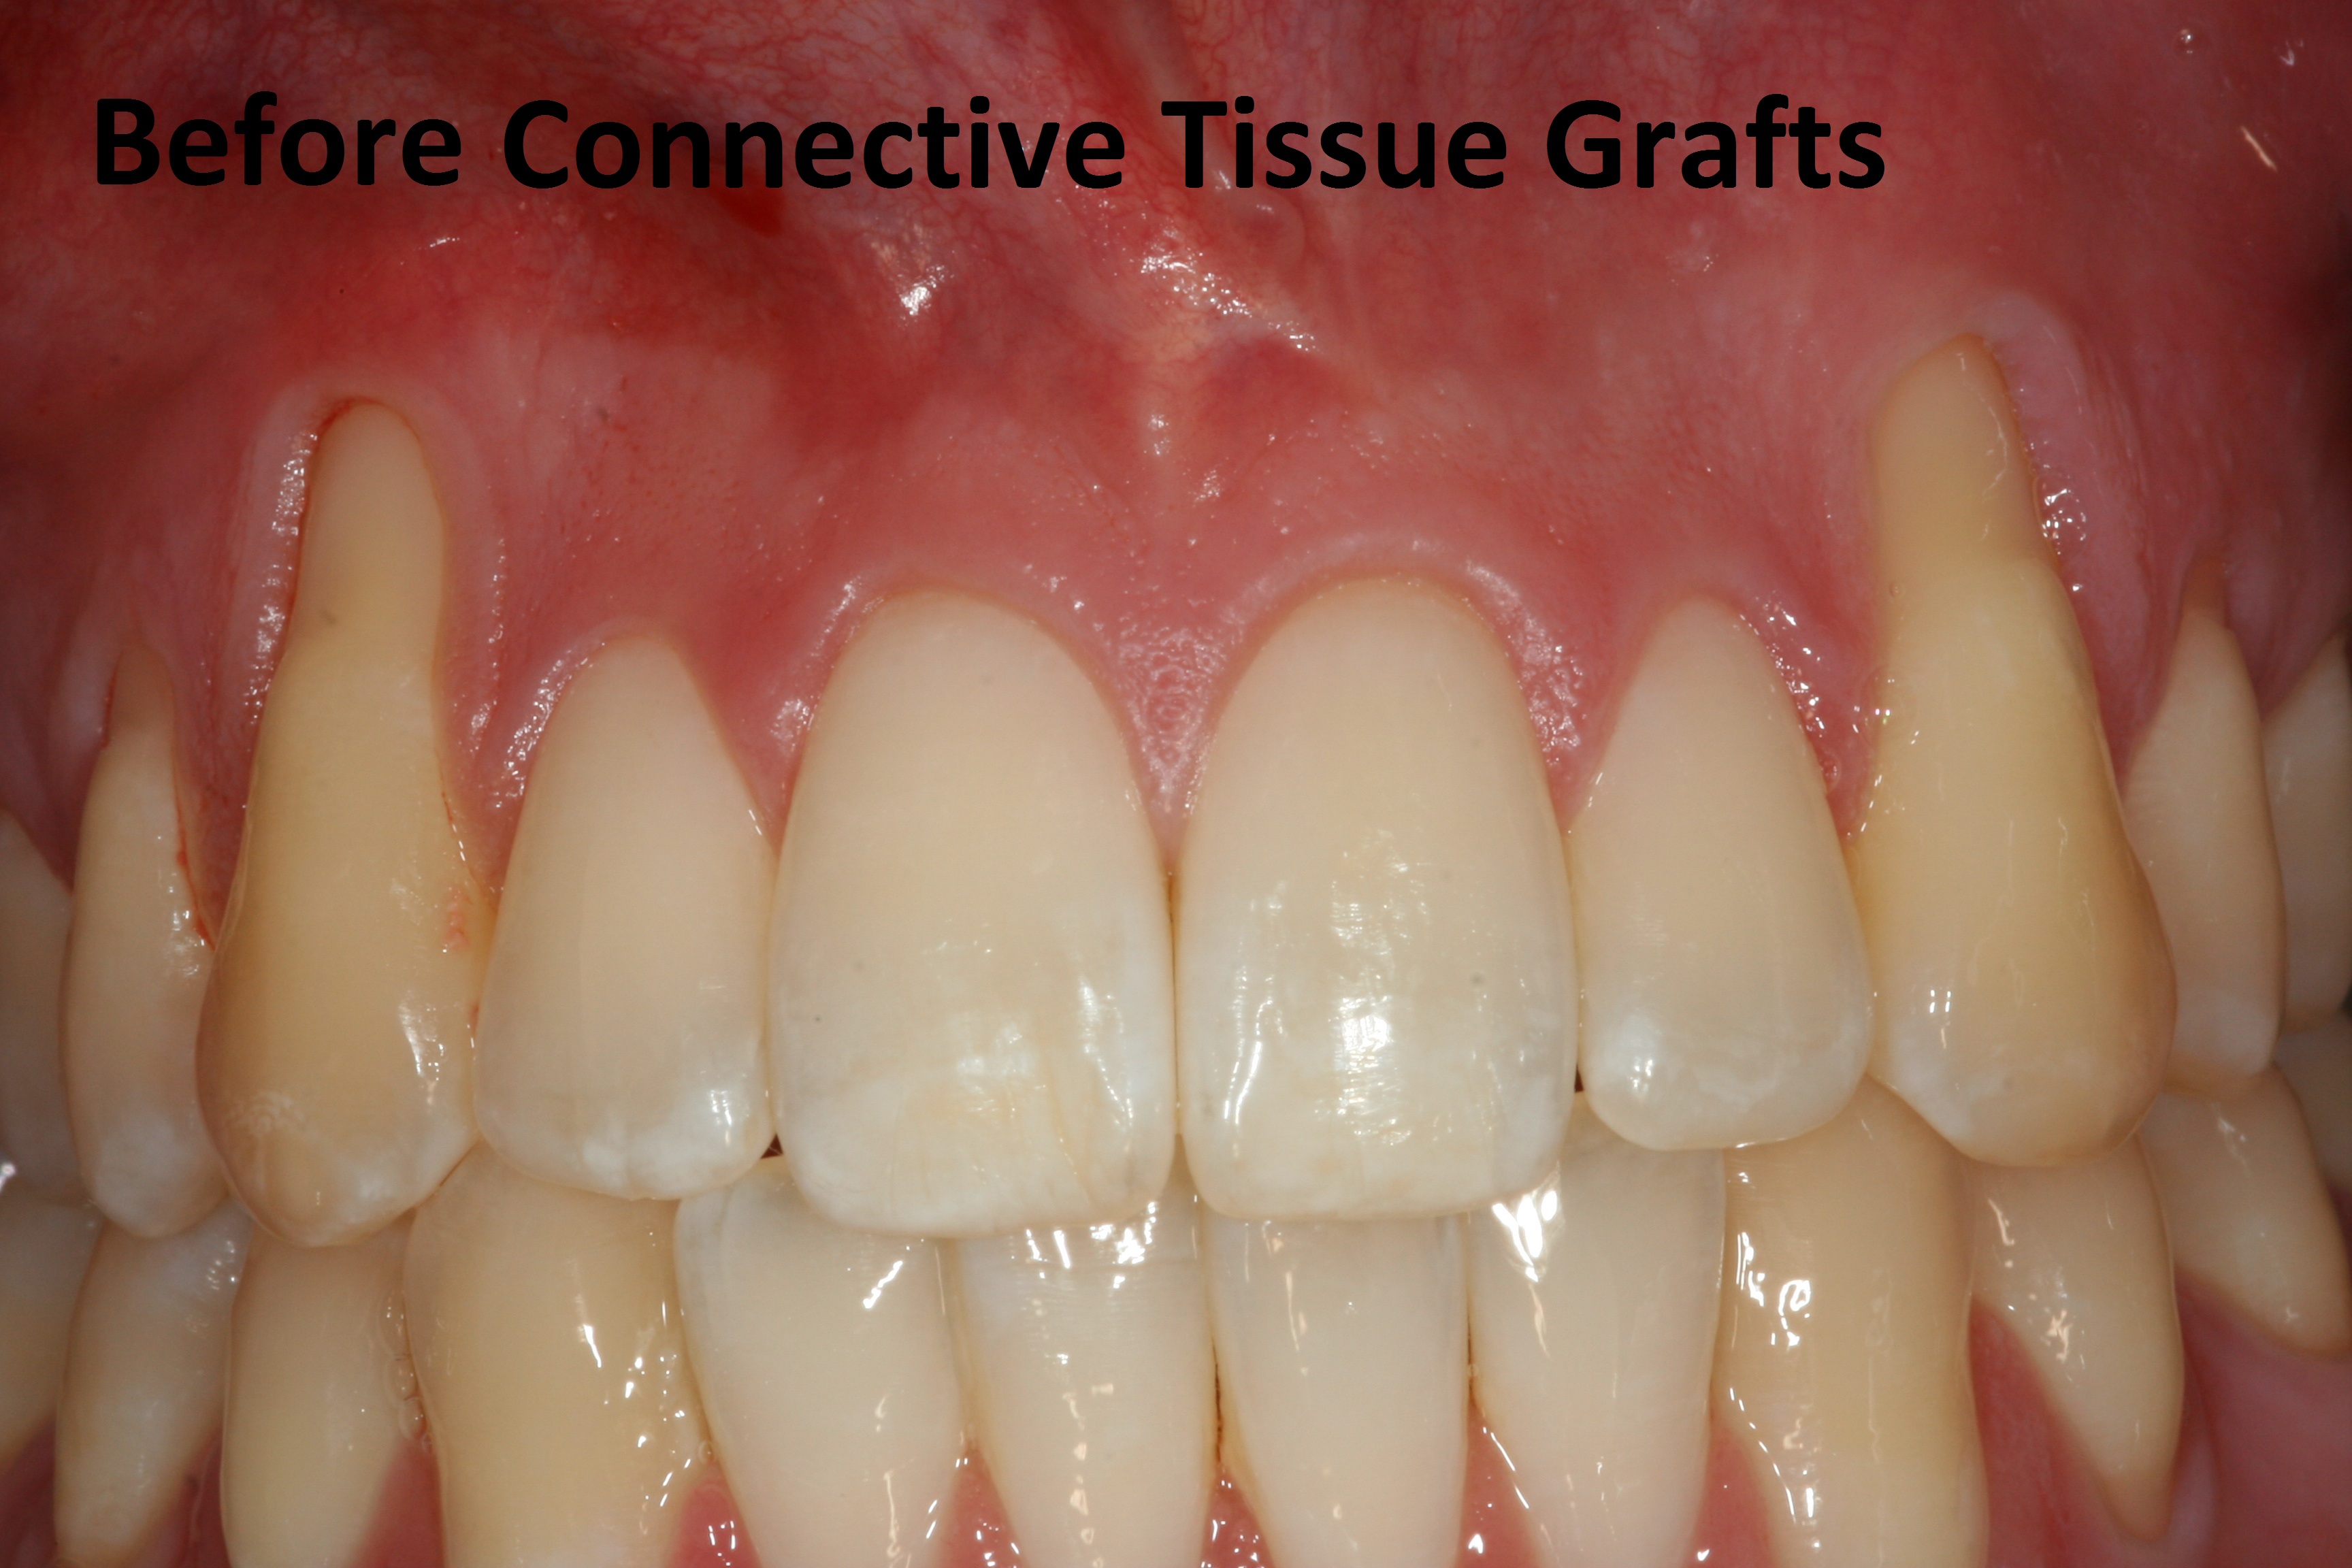 Before connective tissue grafting photo